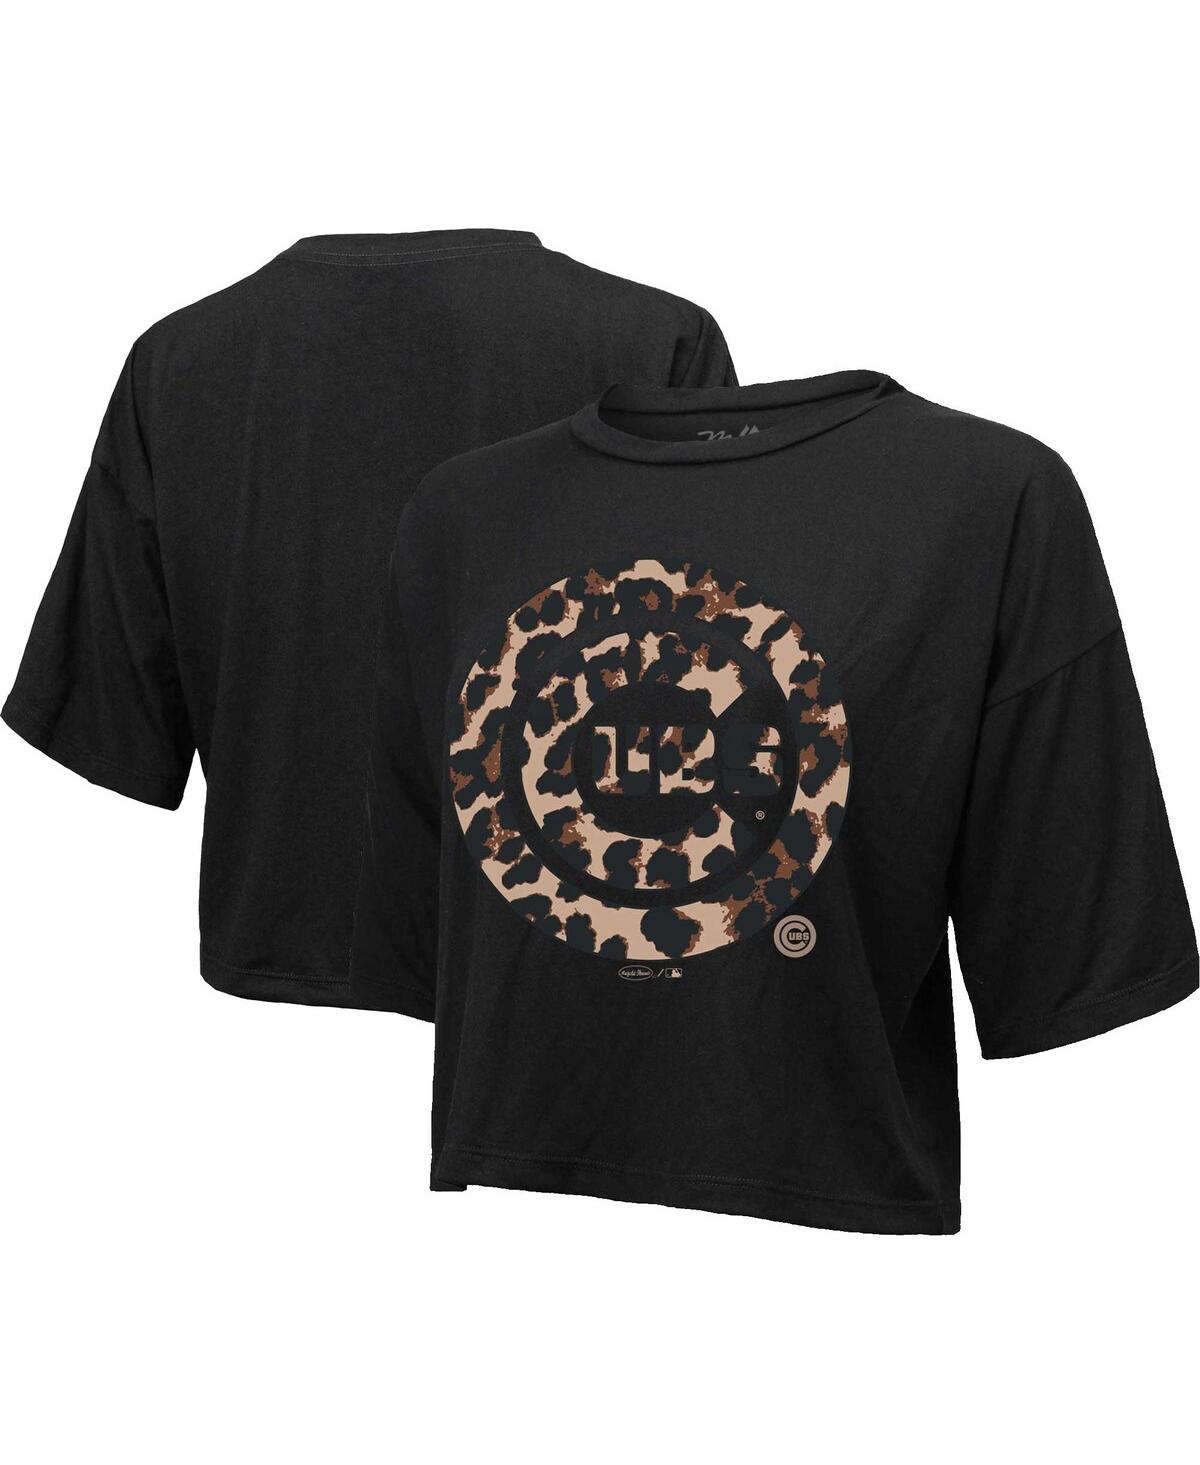 Women's Majestic Threads Black Chicago Cubs Leopard Cropped T-shirt - Black